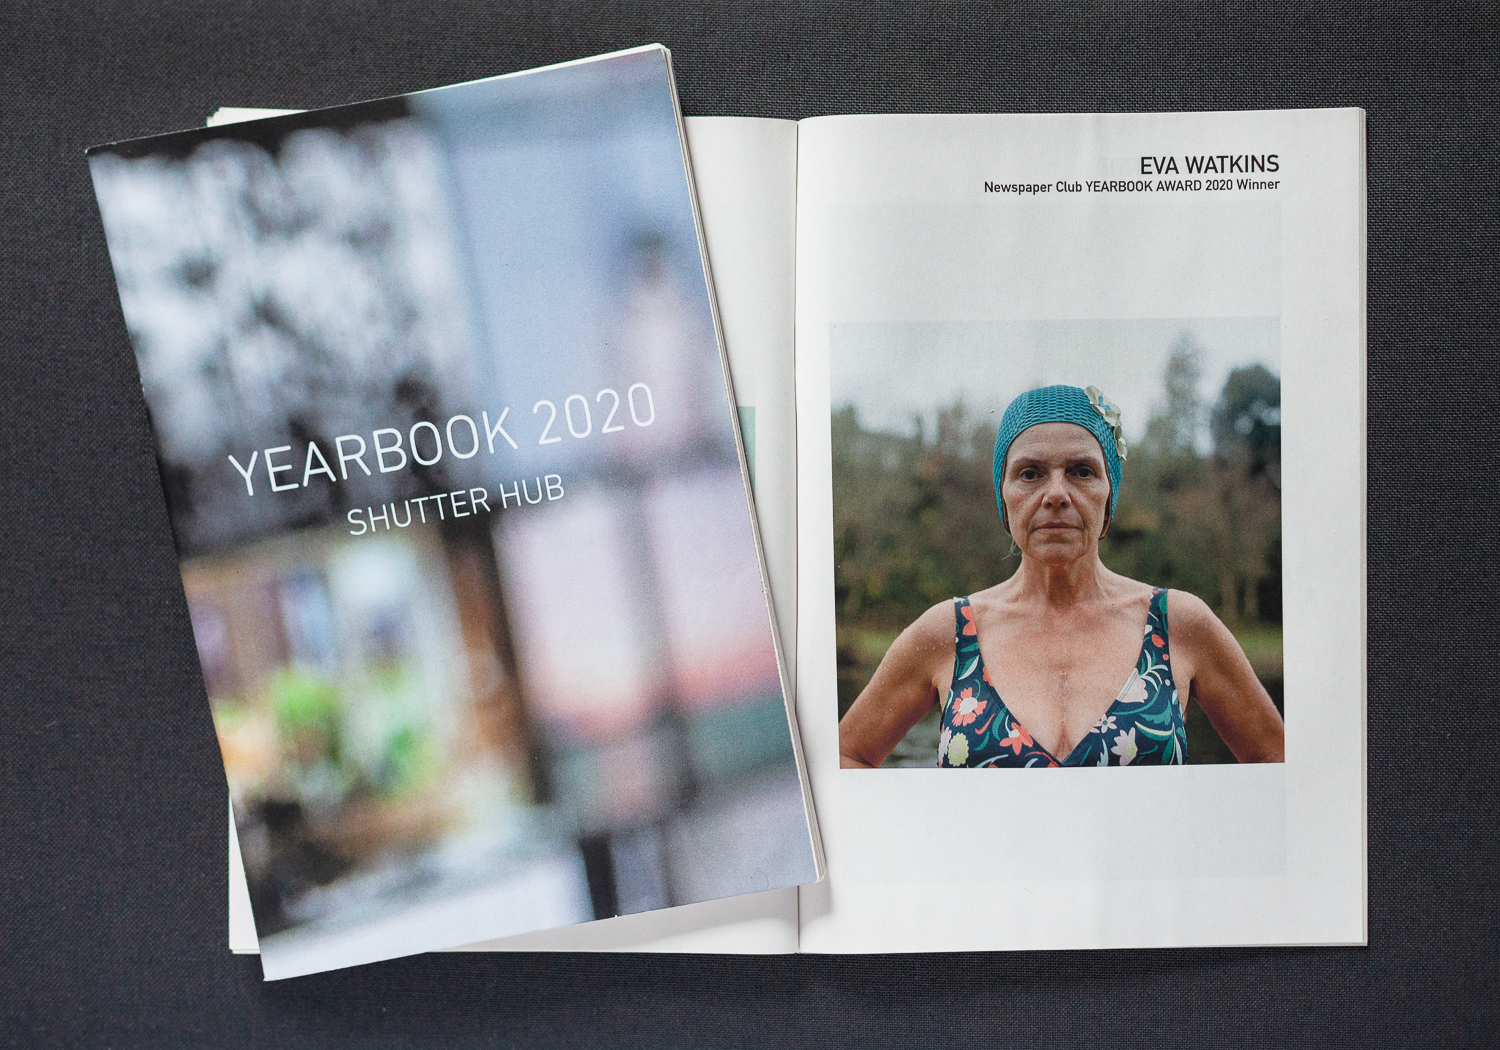 YEARBOOK 2020, one copy to the left showing the front cover with out of focus image and 'YEARBOOK 2020, Shutter Hub' in text, and an open copy underneath, opened to show 'EVA WATKINS, Newspaper Club YEARBOOK 2020 Award Winner' and an image of a synchronised swimmer